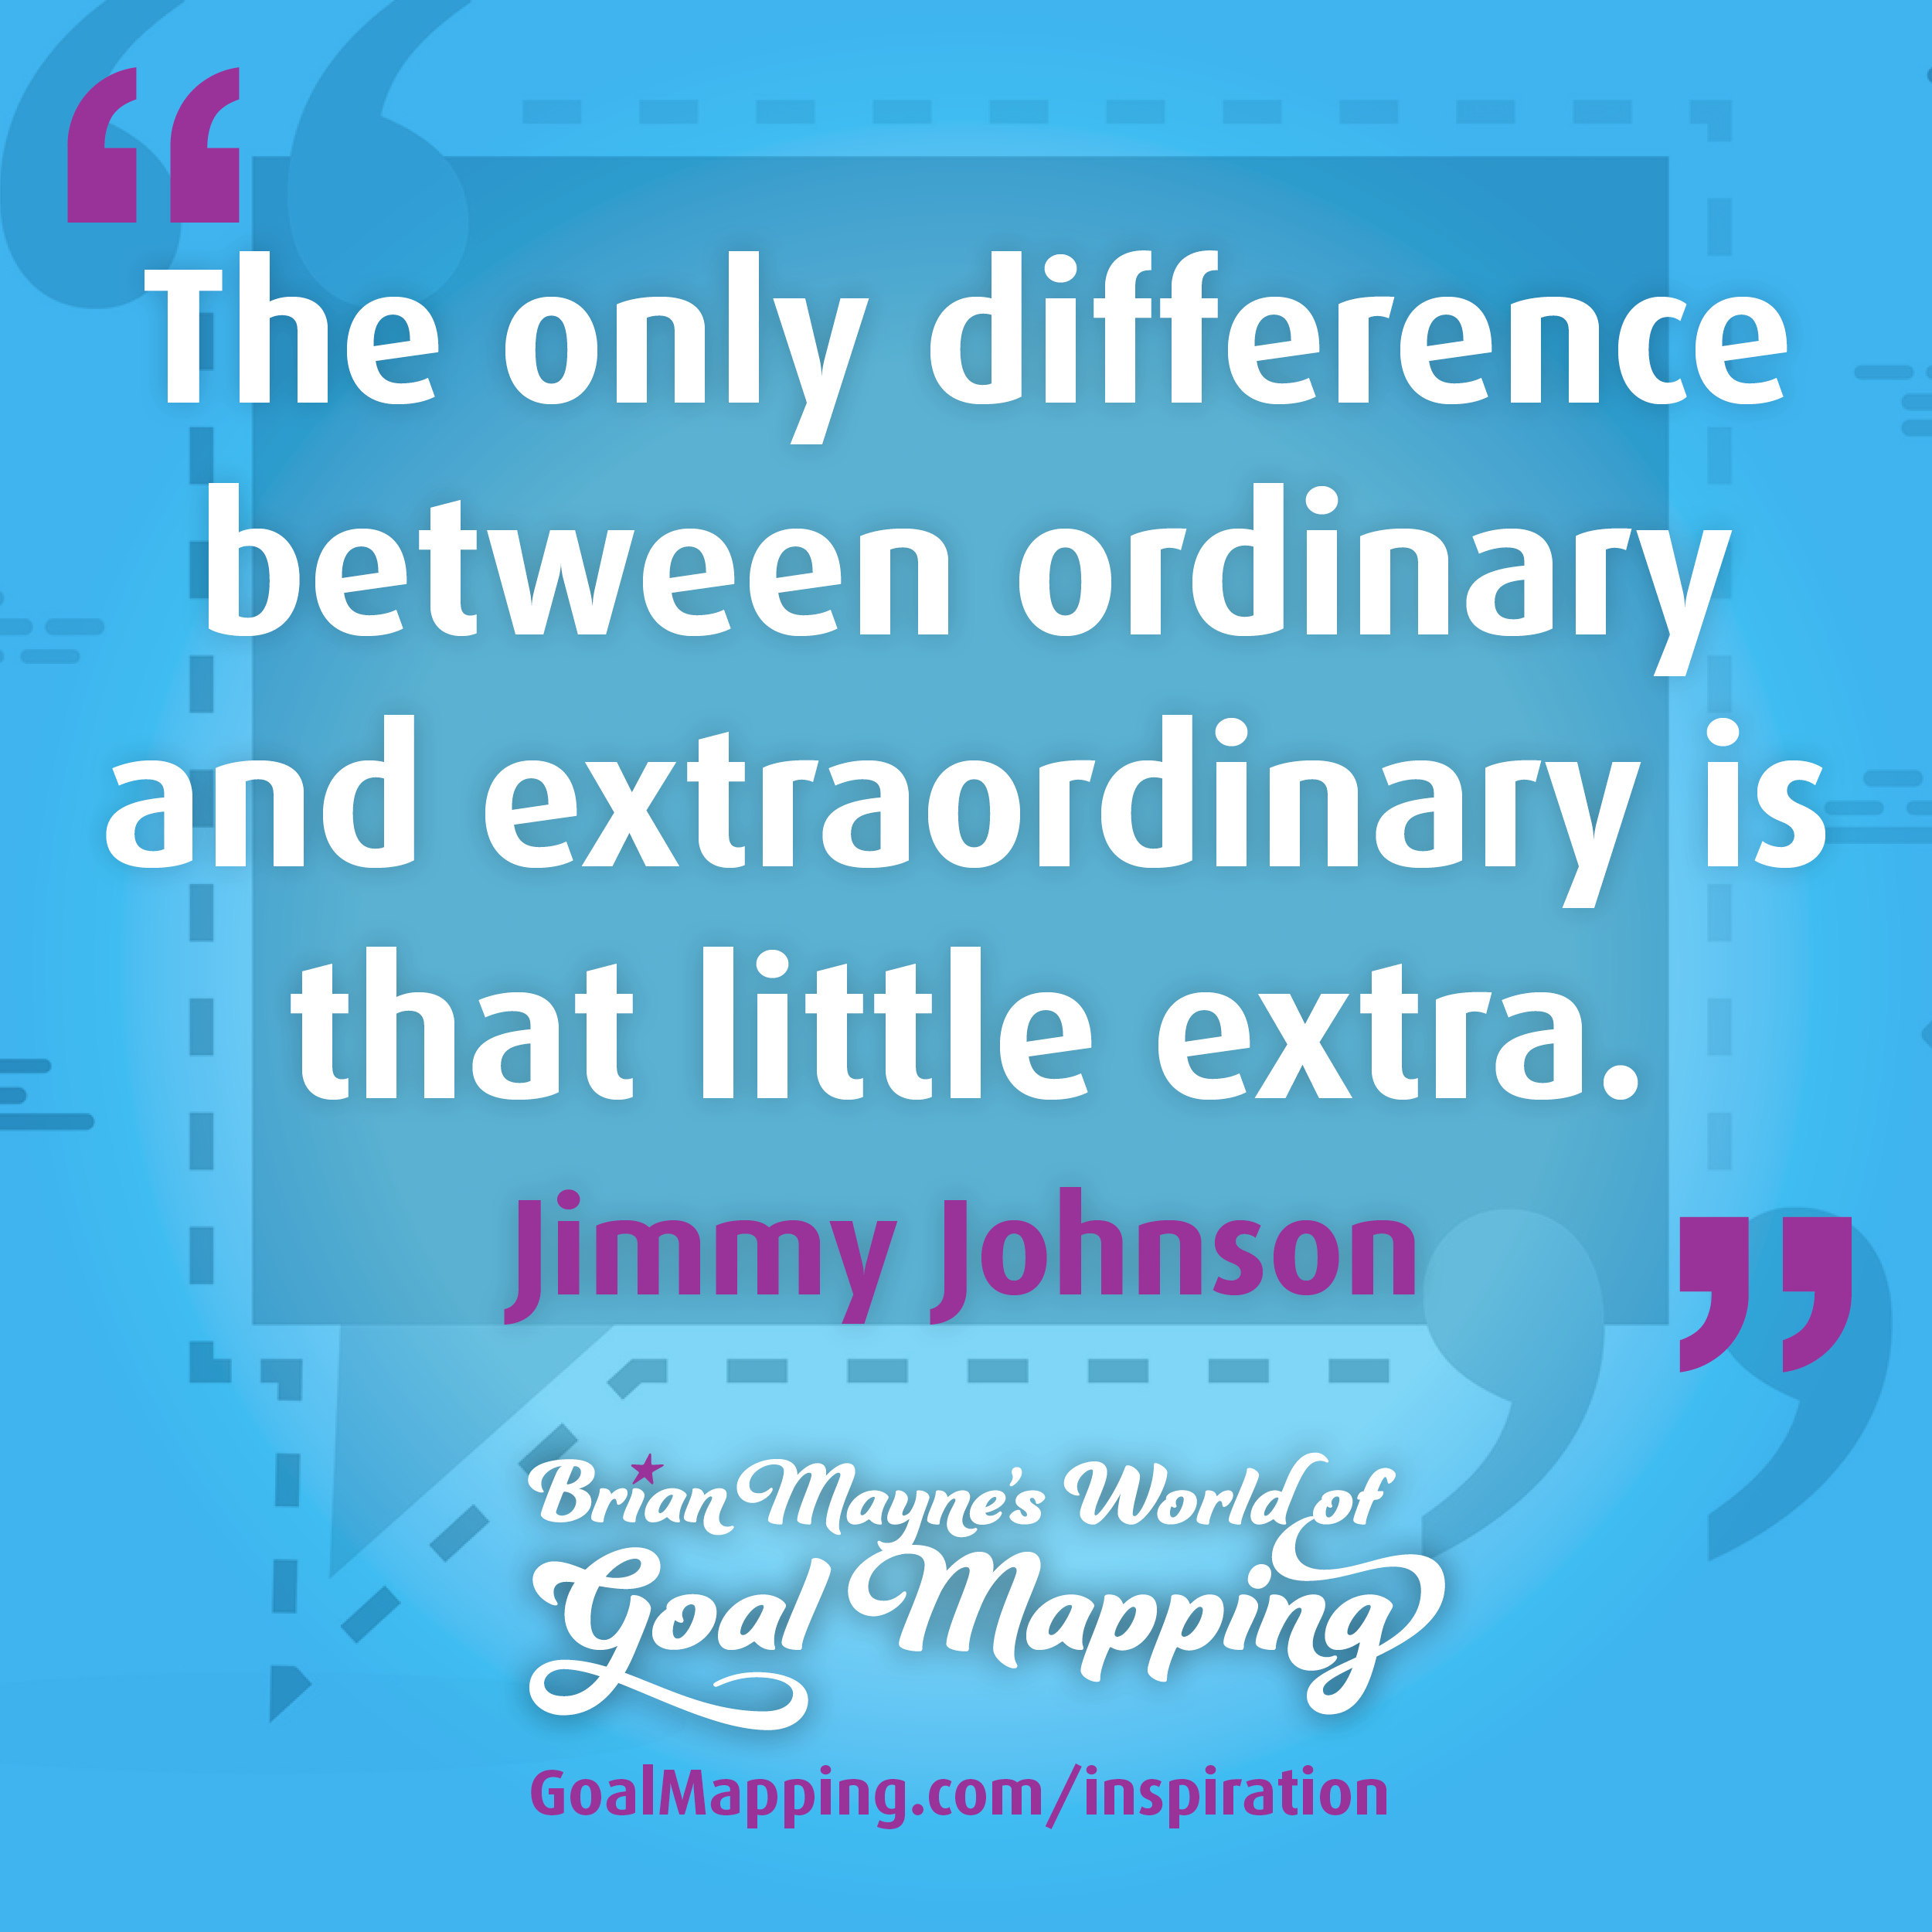 "The only difference between ordinary and extraordinary is that little extra." Jimmy Johnson